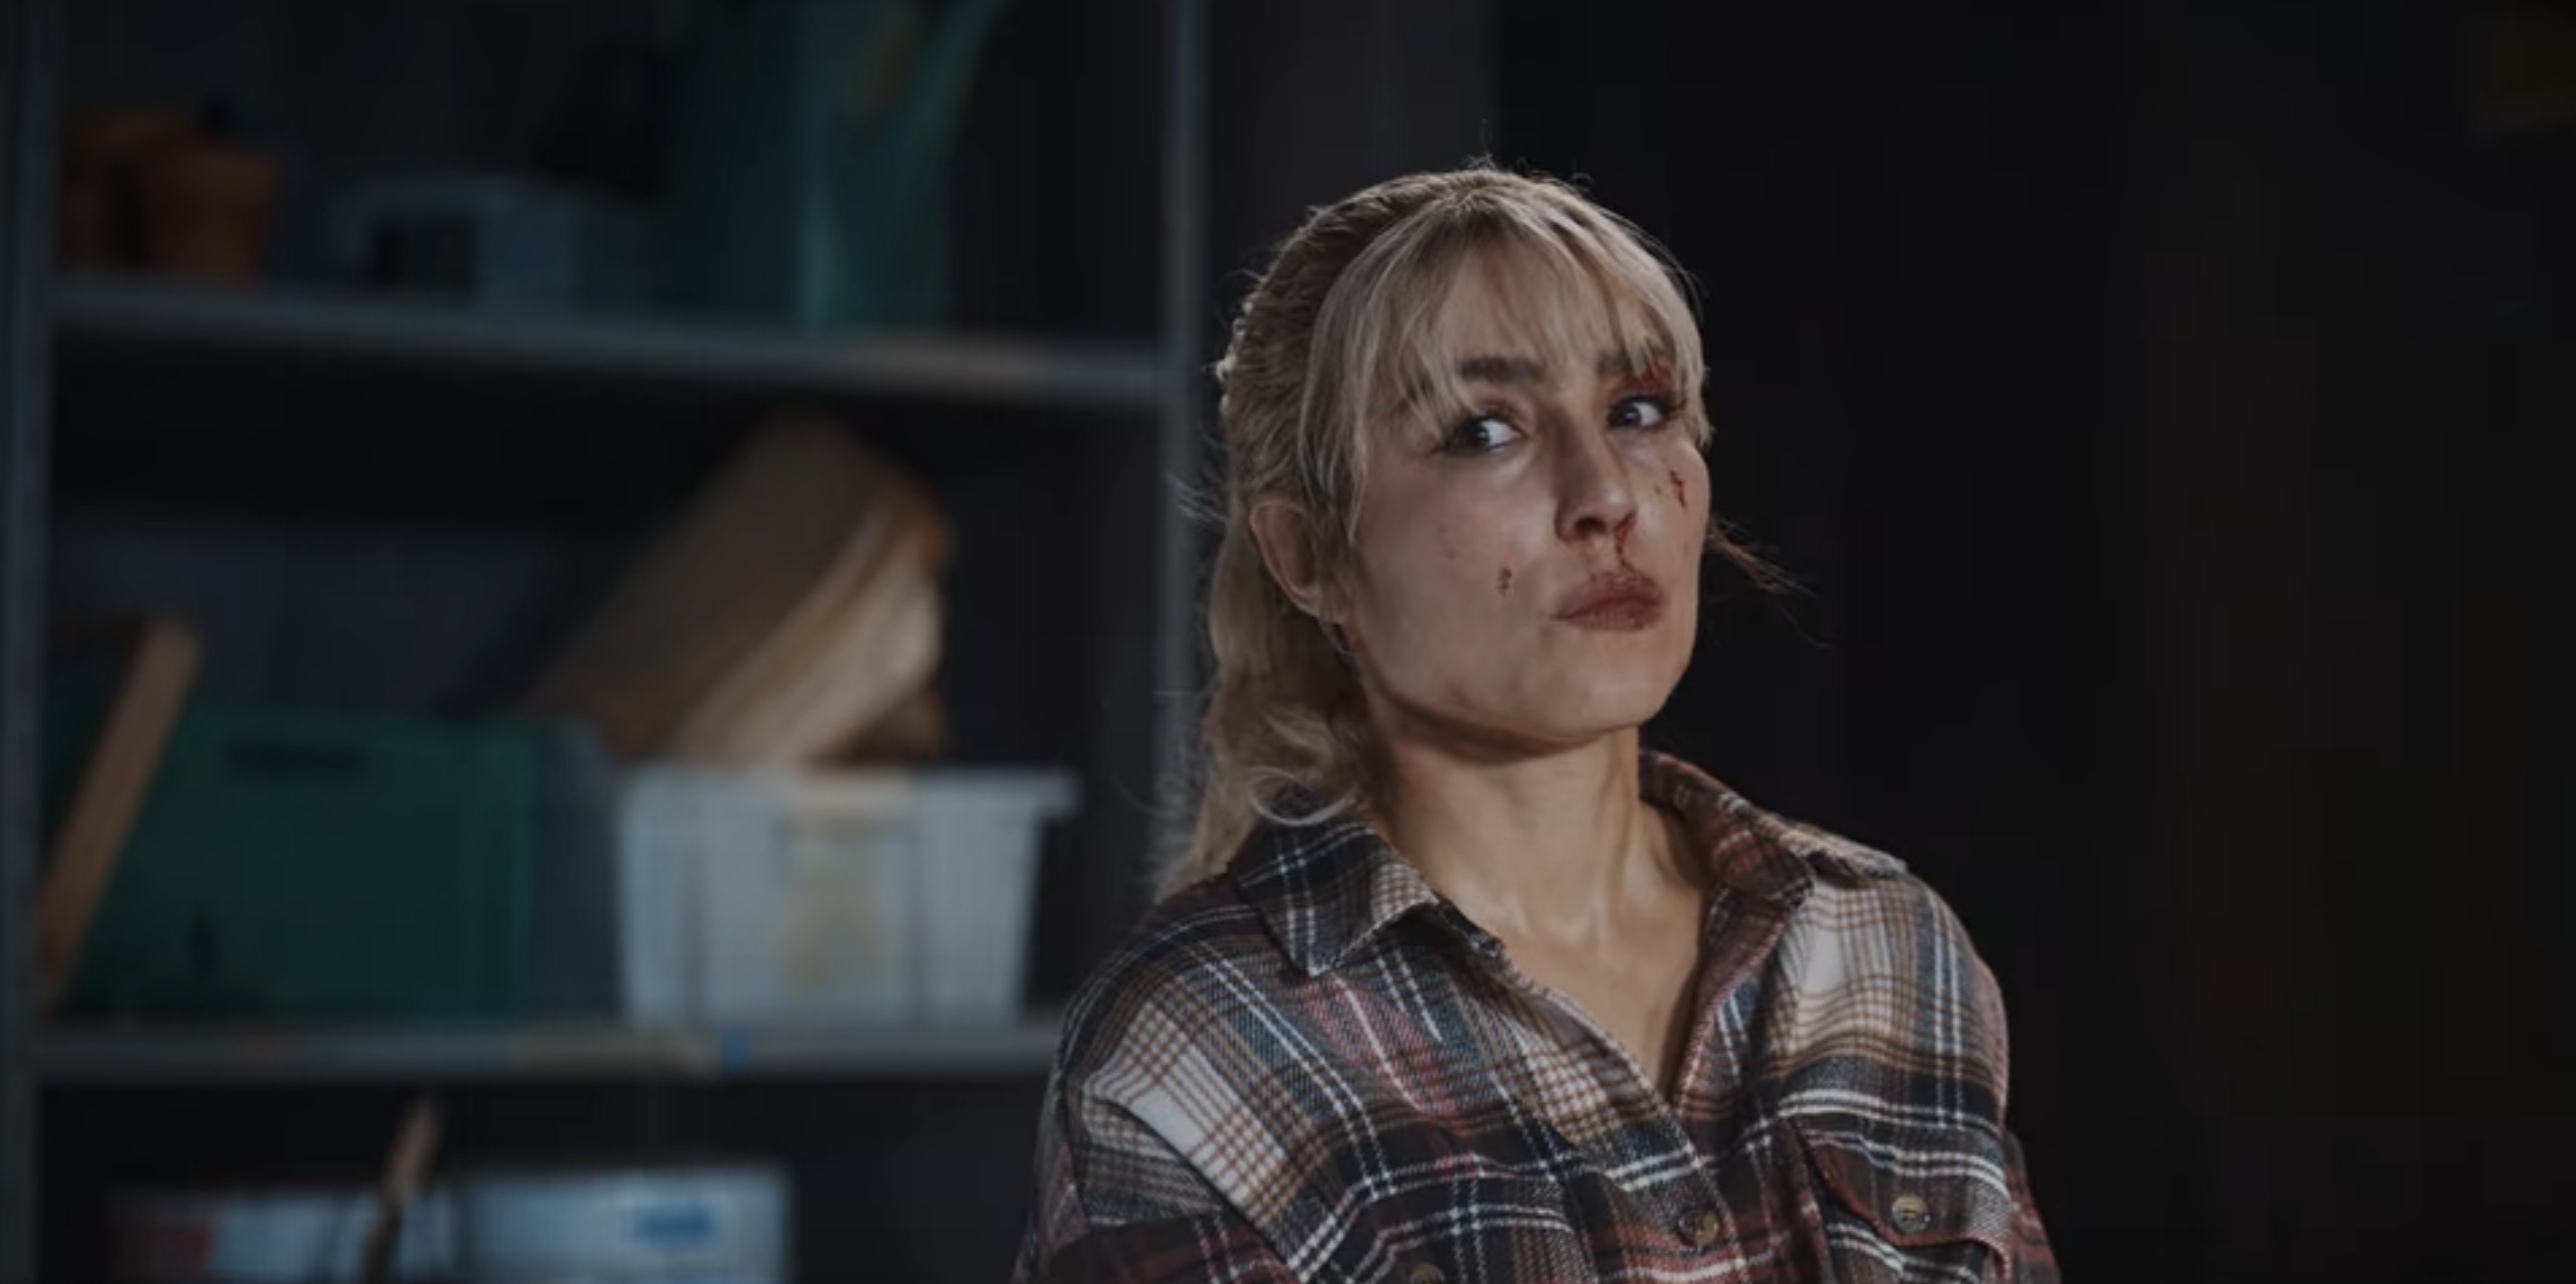 The Trip Cast on Netflix (I onde dager) - Noomi Rapace as Lisa